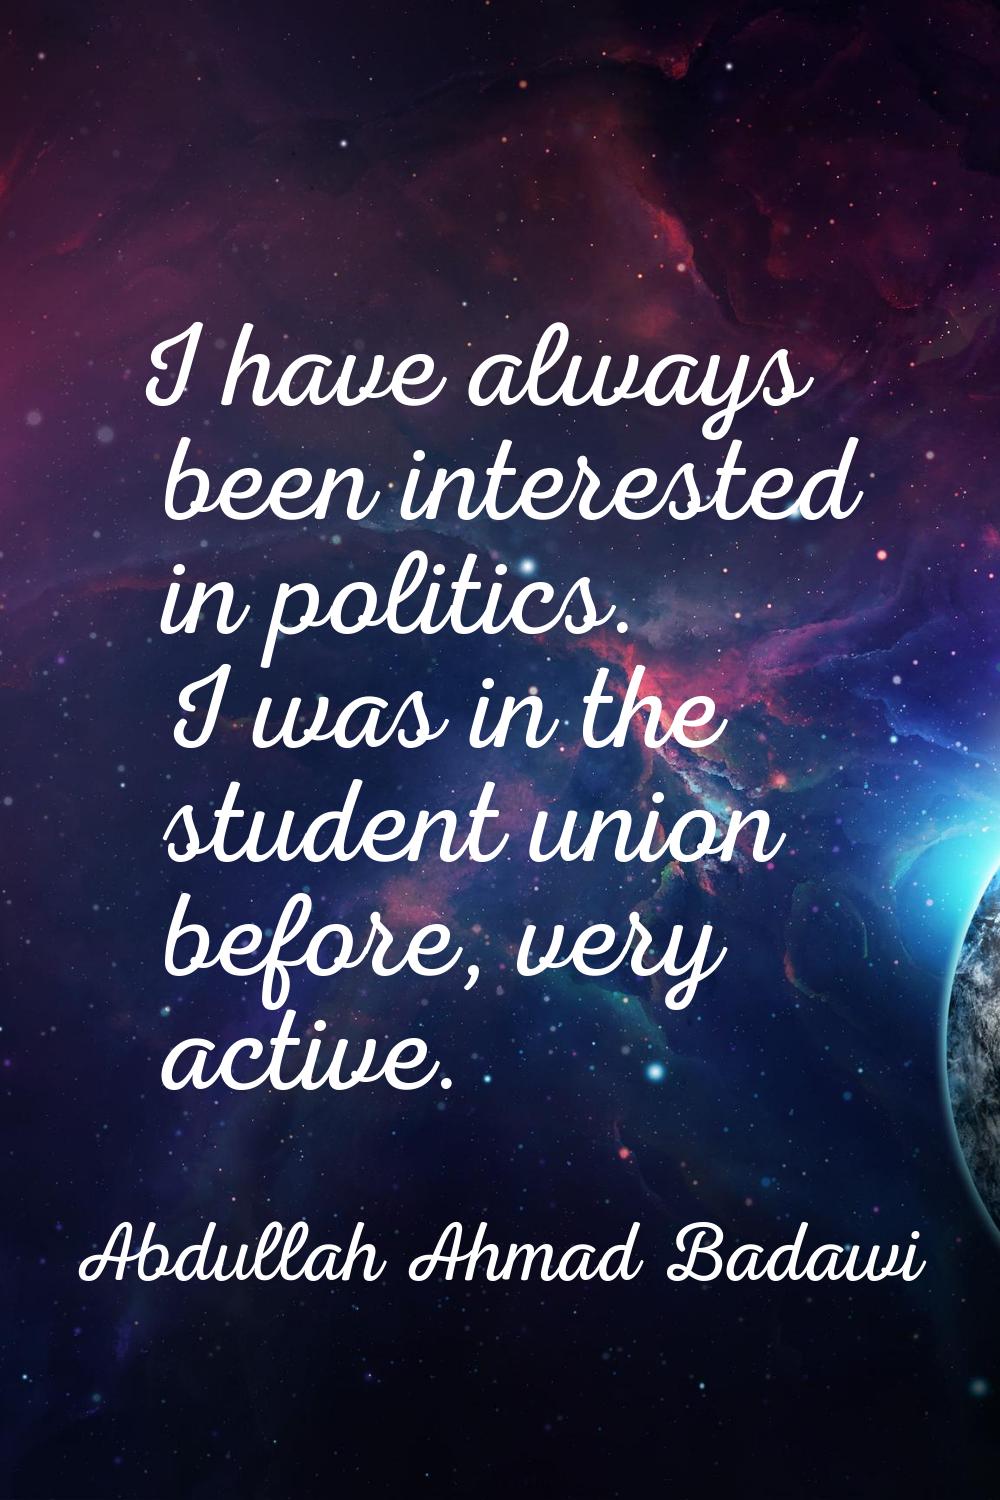 I have always been interested in politics. I was in the student union before, very active.